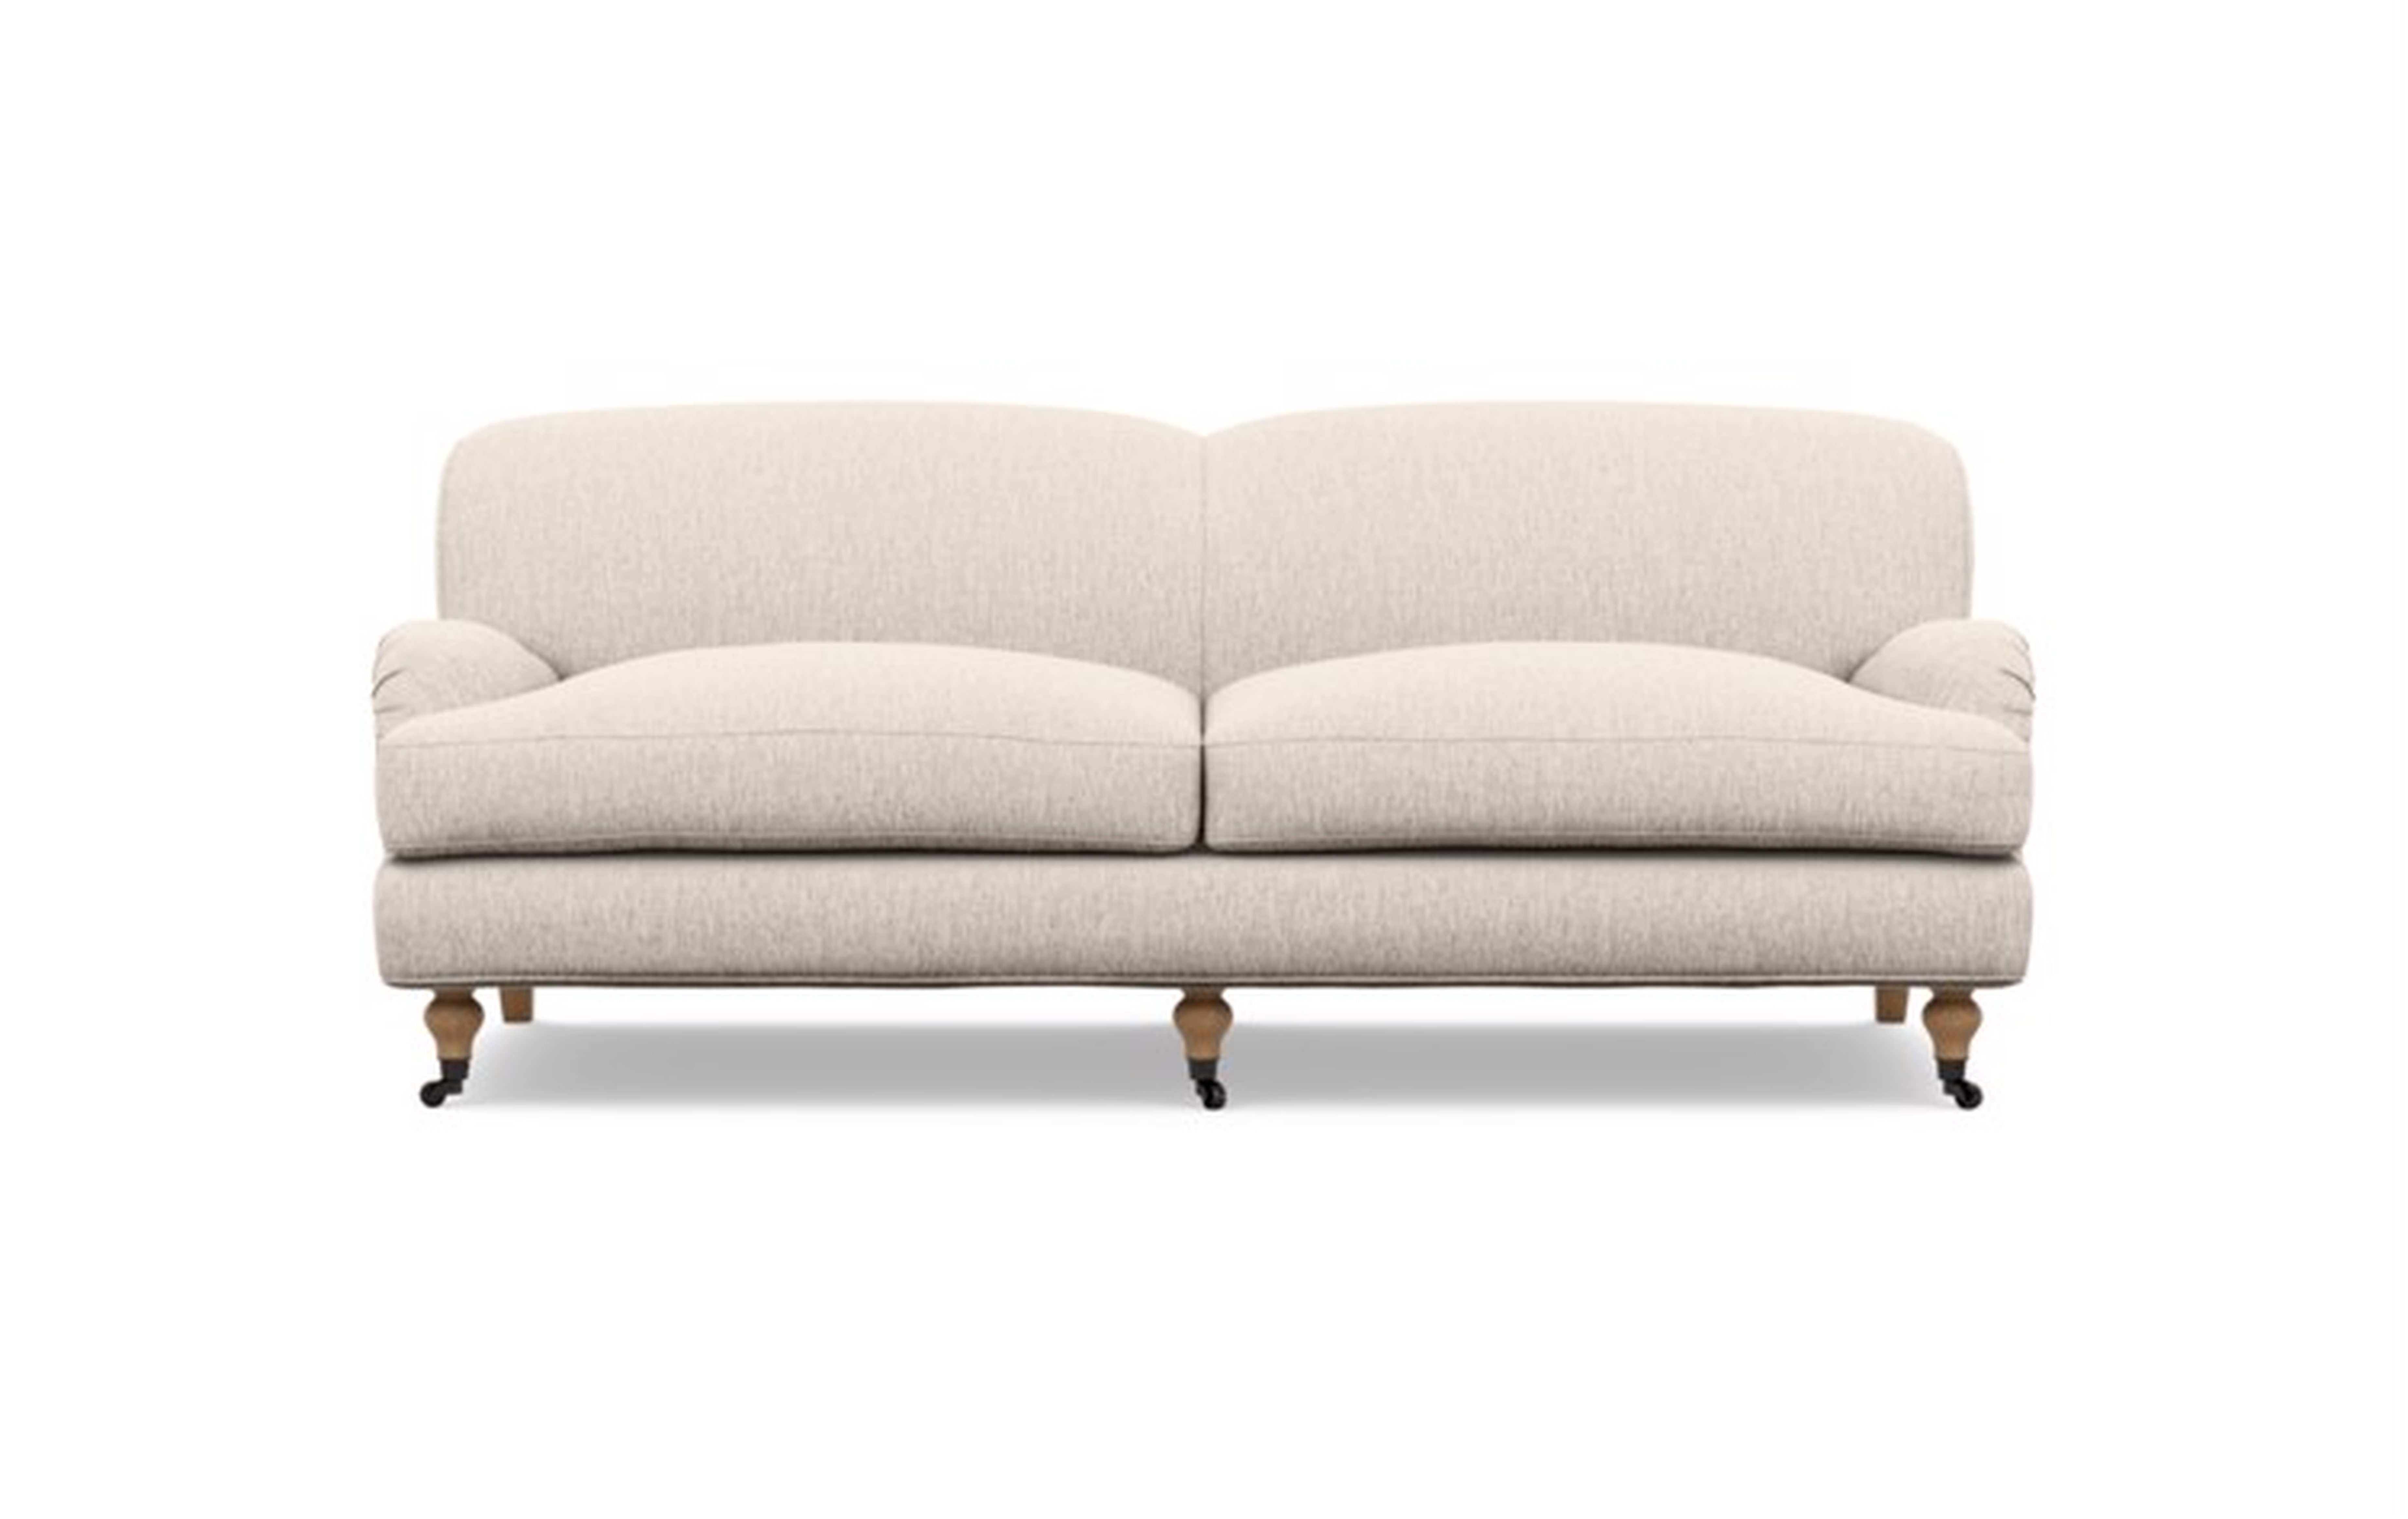 Rose by The Everygirl Sofa in Wheat Cross Weave with White Oak with Antiqued Caster legs - Interior Define